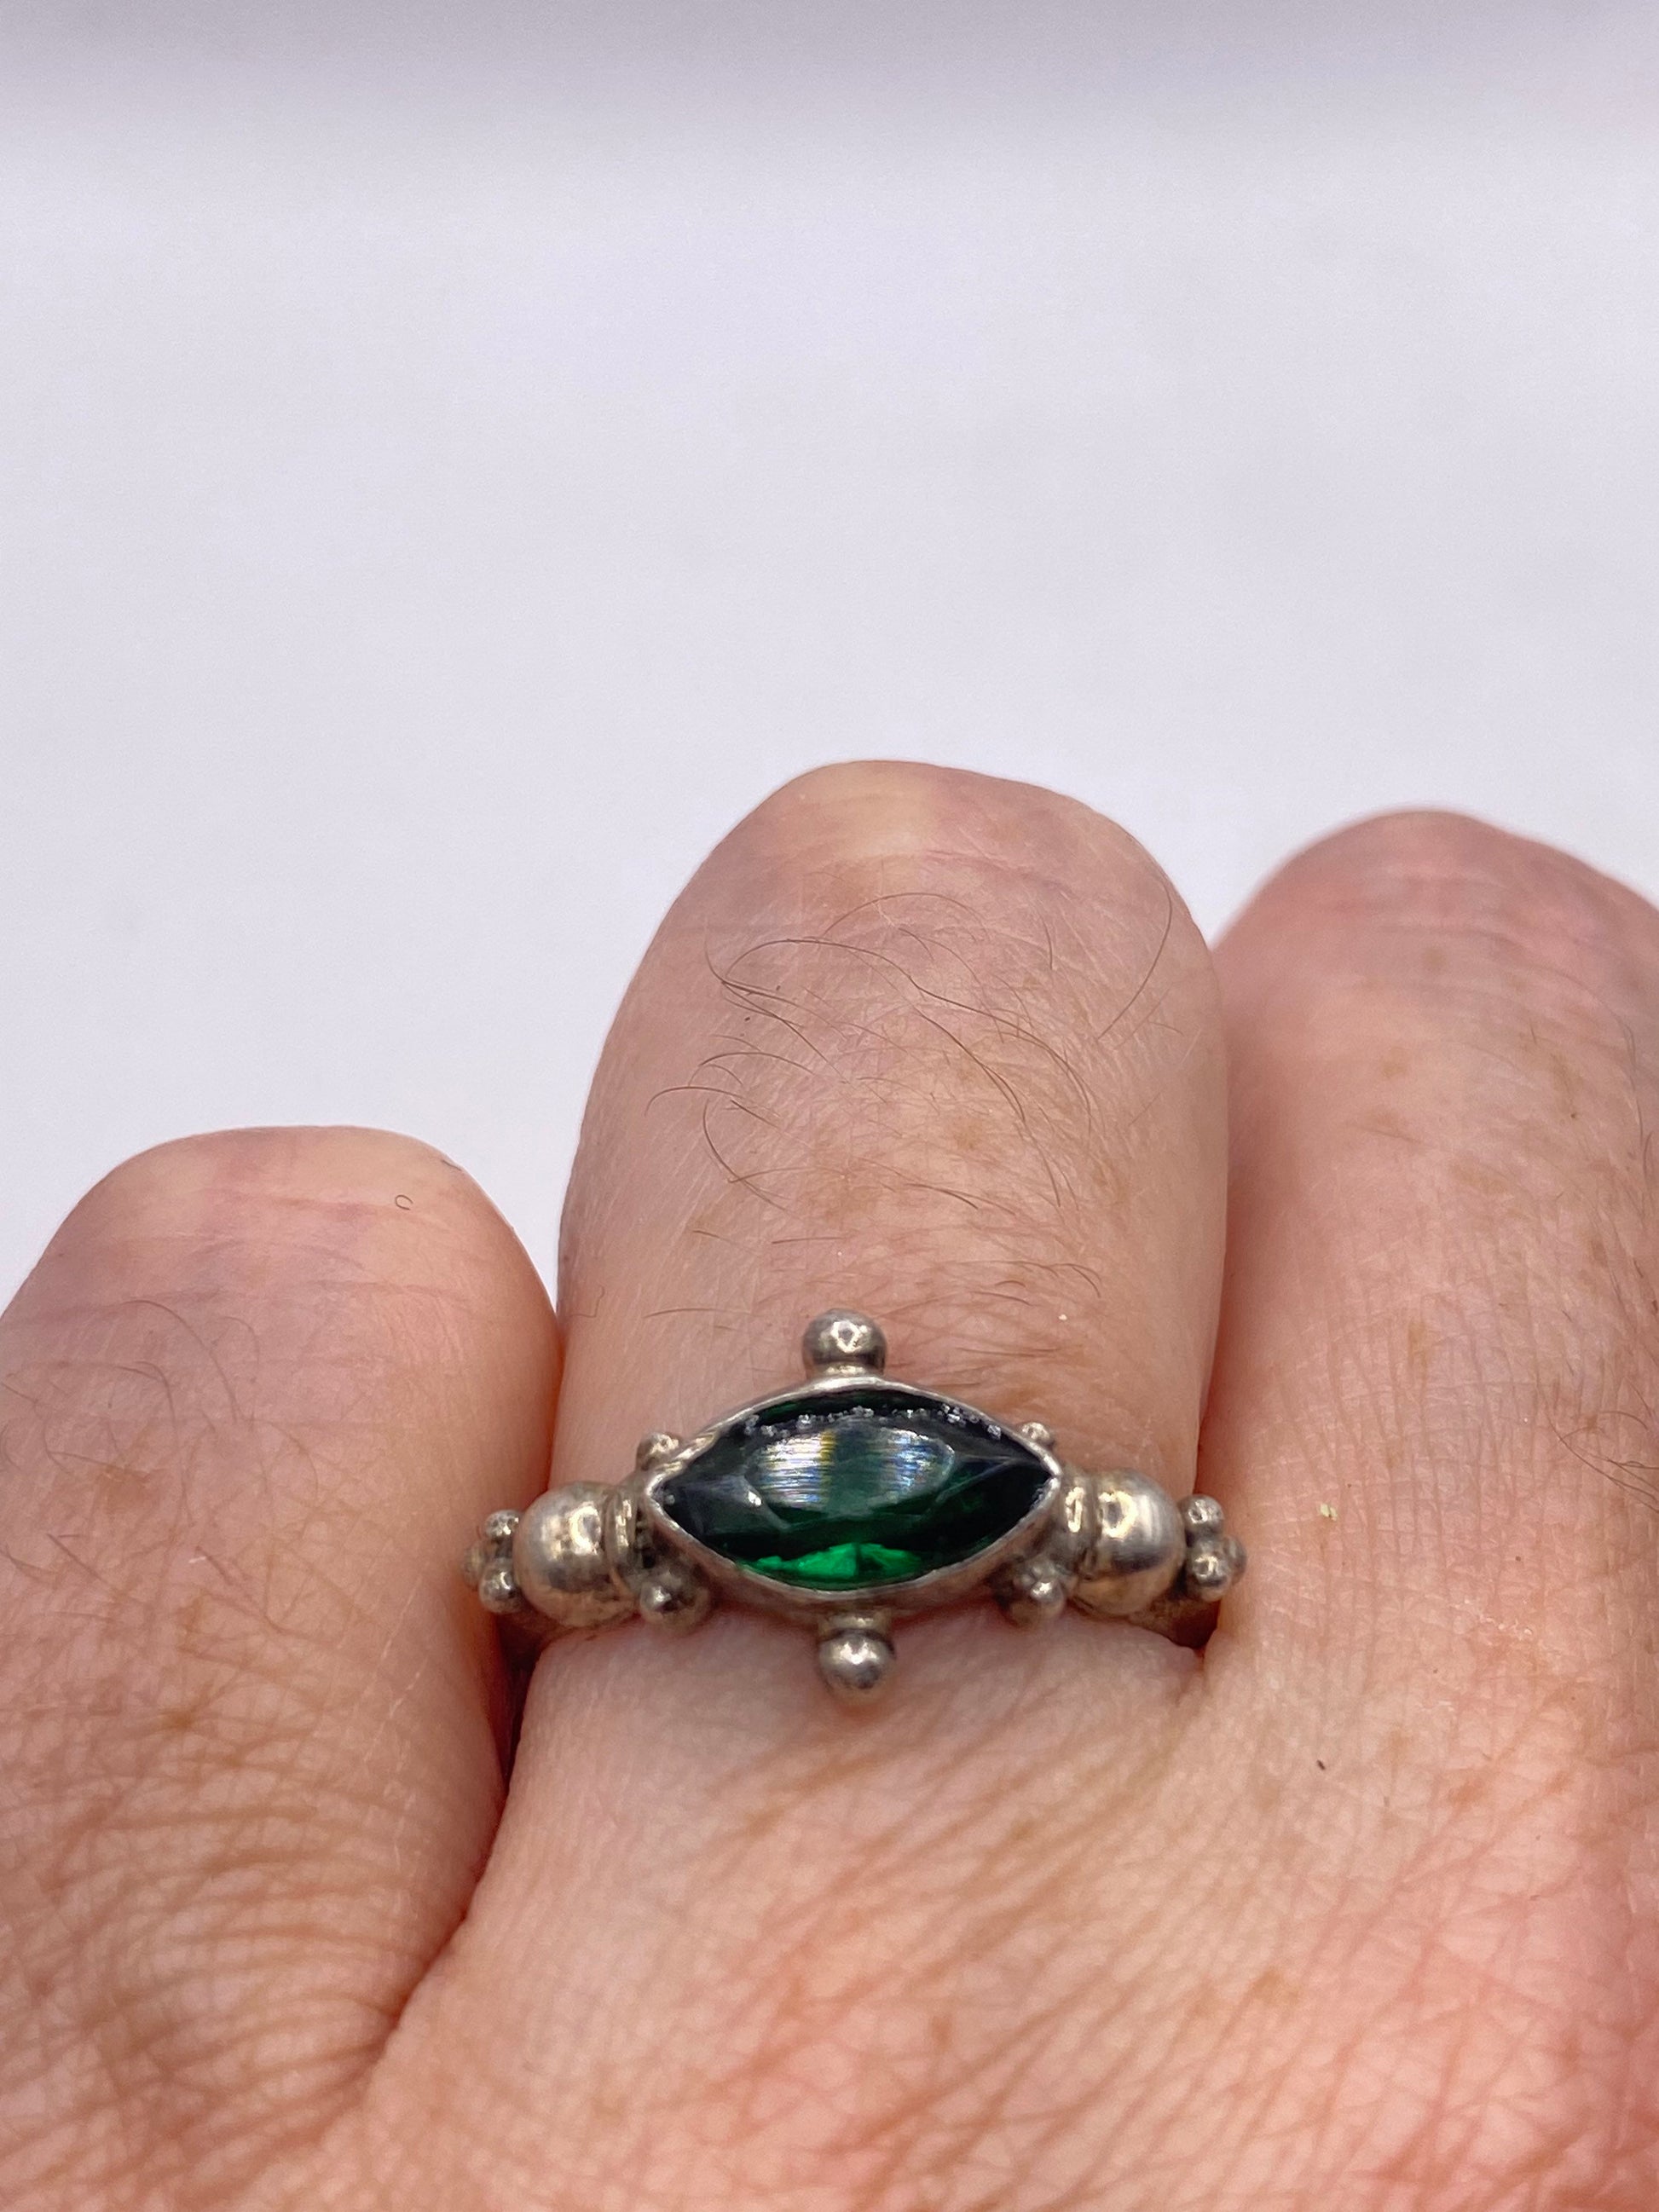 Vintage Handmade Green Chrome Diopside Setting Sterling Silver Gothic Ring